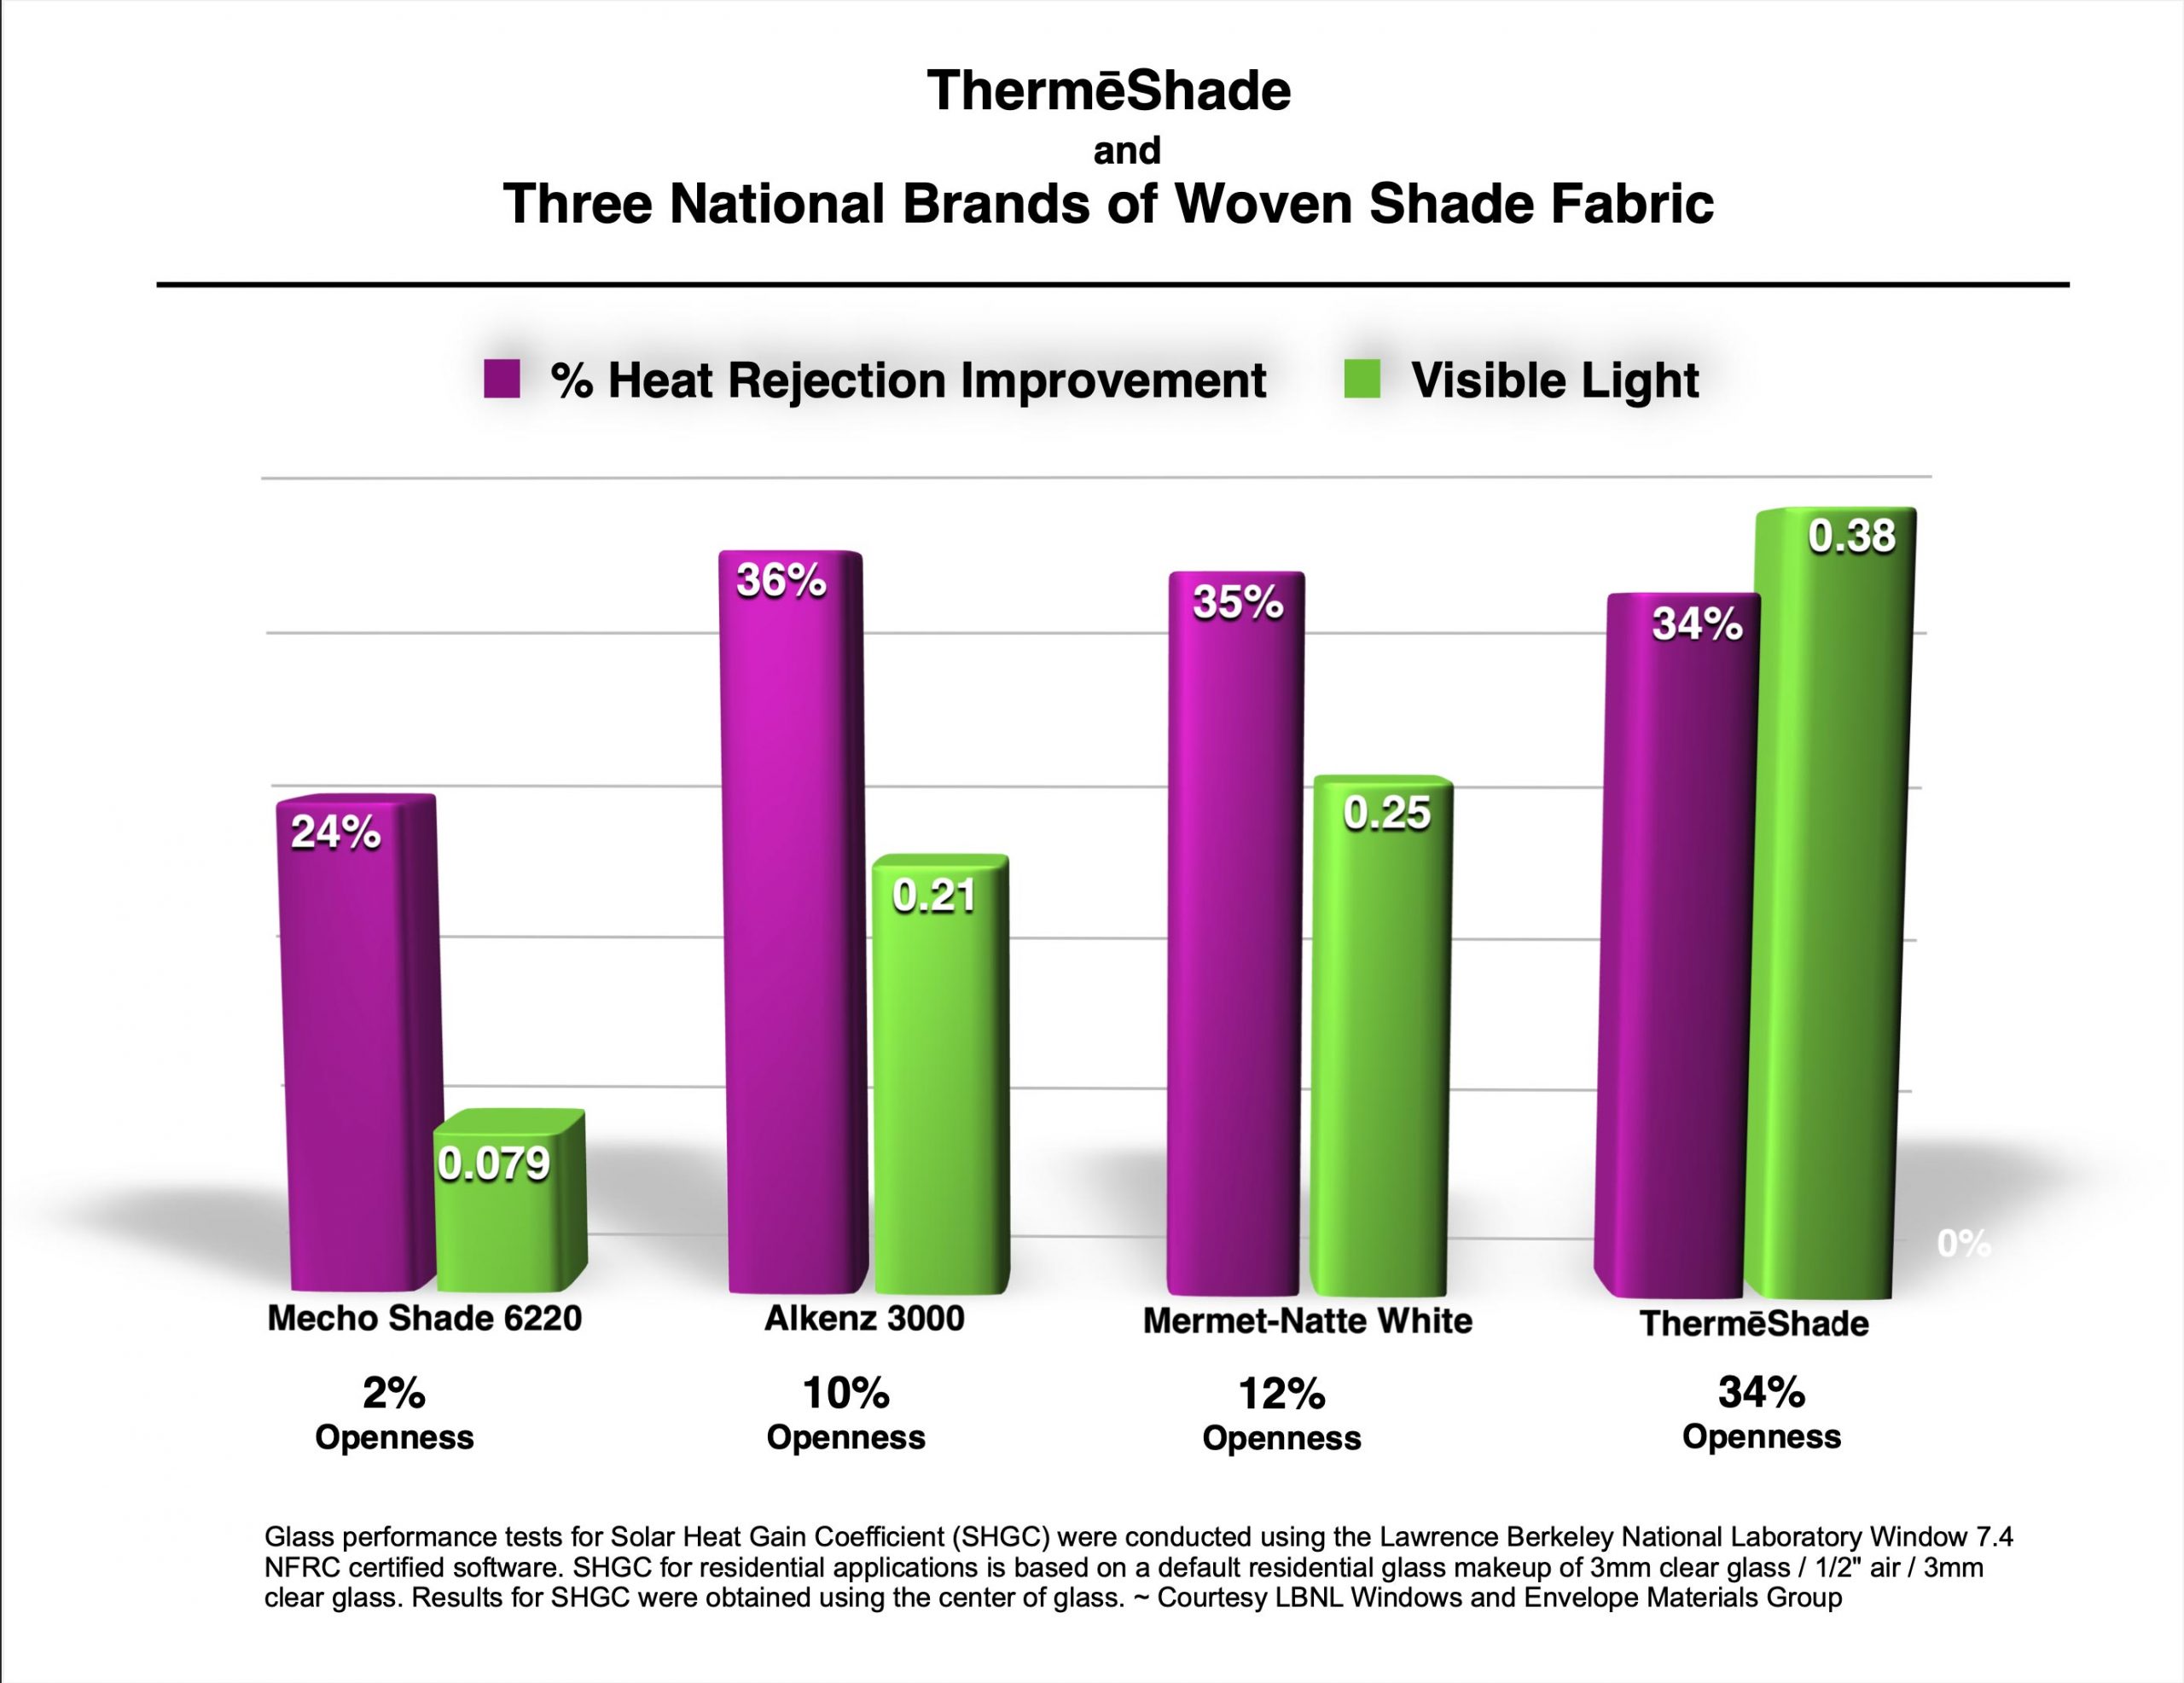 Comparison chart of percent heat rejection improvement and visible light between ThermeShade and three national brands of woven shade fabric shows that Mecho shade 6220 has 2% openness, Alkenz 300 has 10% openness, Mermet-Natte White has 12% openness and ThermeShade has 34% openness. Glass performance tests for Solar Heat Gain Coefficient (SHGC) were conducted using the Lawrence Berkeley National Laboratory Window 7.4 NFRC certified software. SHGC for residential applications is based on a default residential glass makeup of 3mm clear glass / 1/2" air / 3mm clear glass. Results for SHGC were obtained using the center of glass. ~ Courtesy LBNL Windows and Envelope Materials Group.